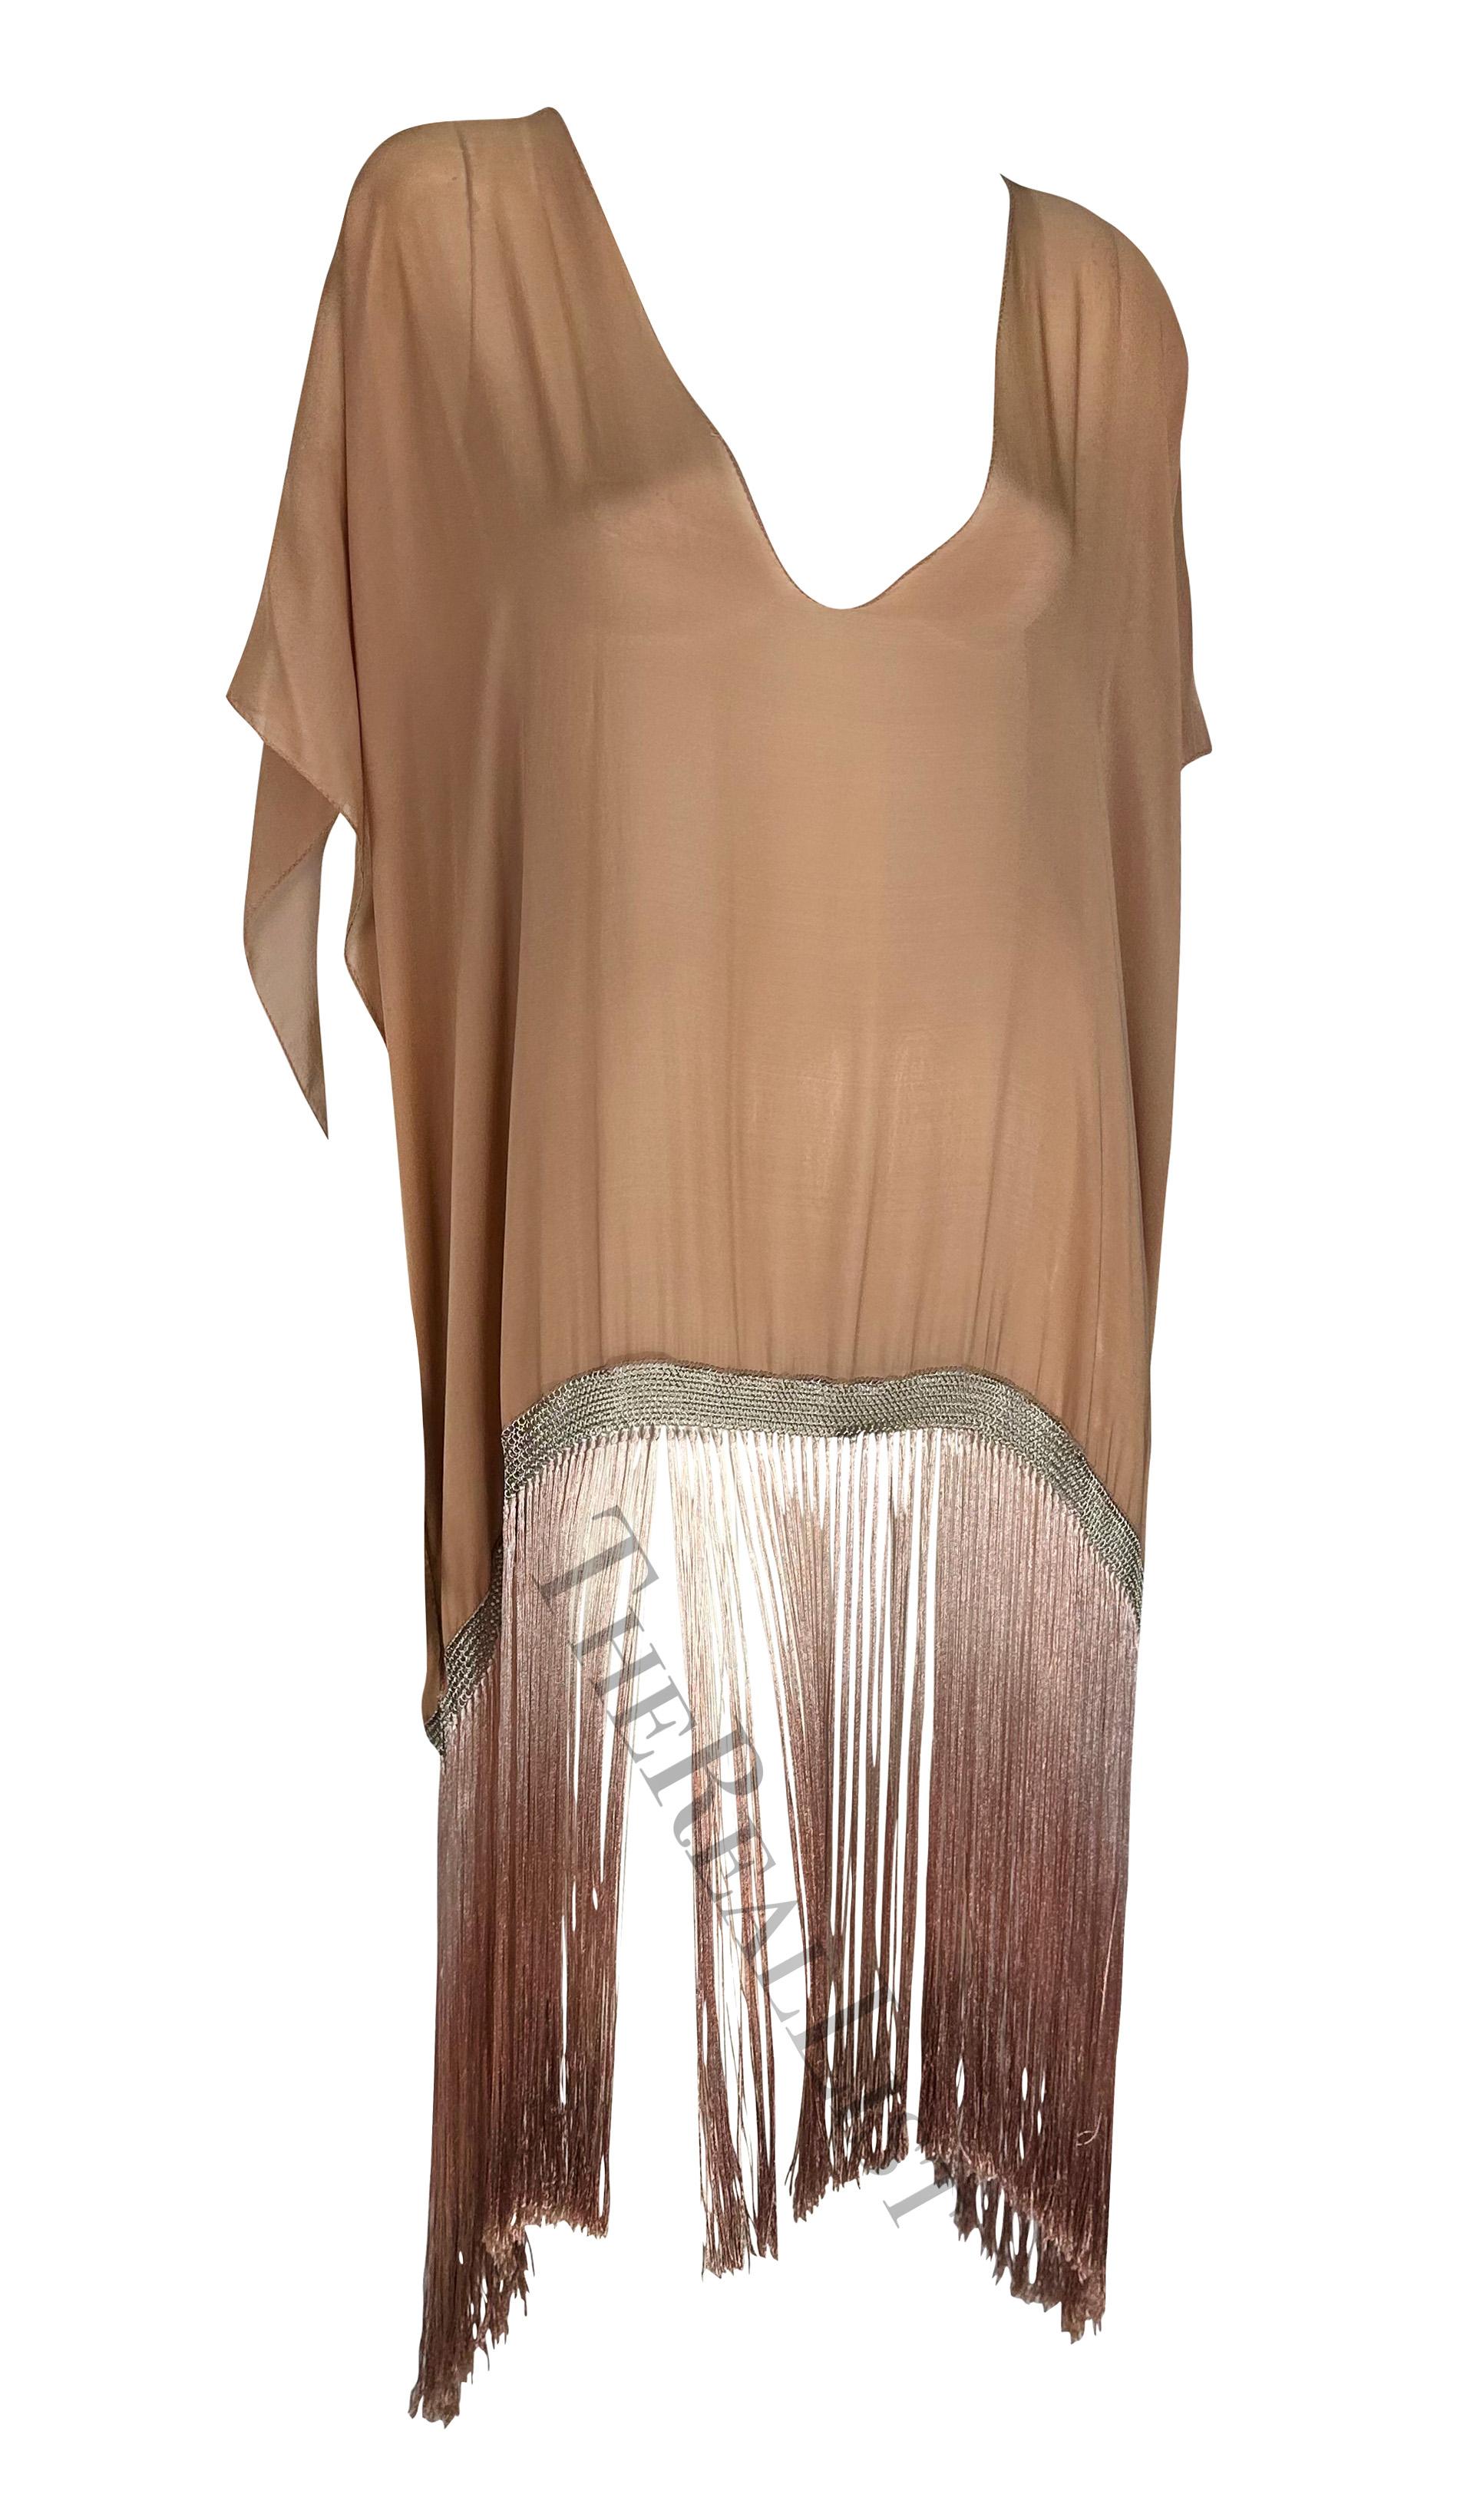 S/S 2004 Gucci by Tom Ford Chain Link Peach Ombré Fringe Kaftan Cover Up  6